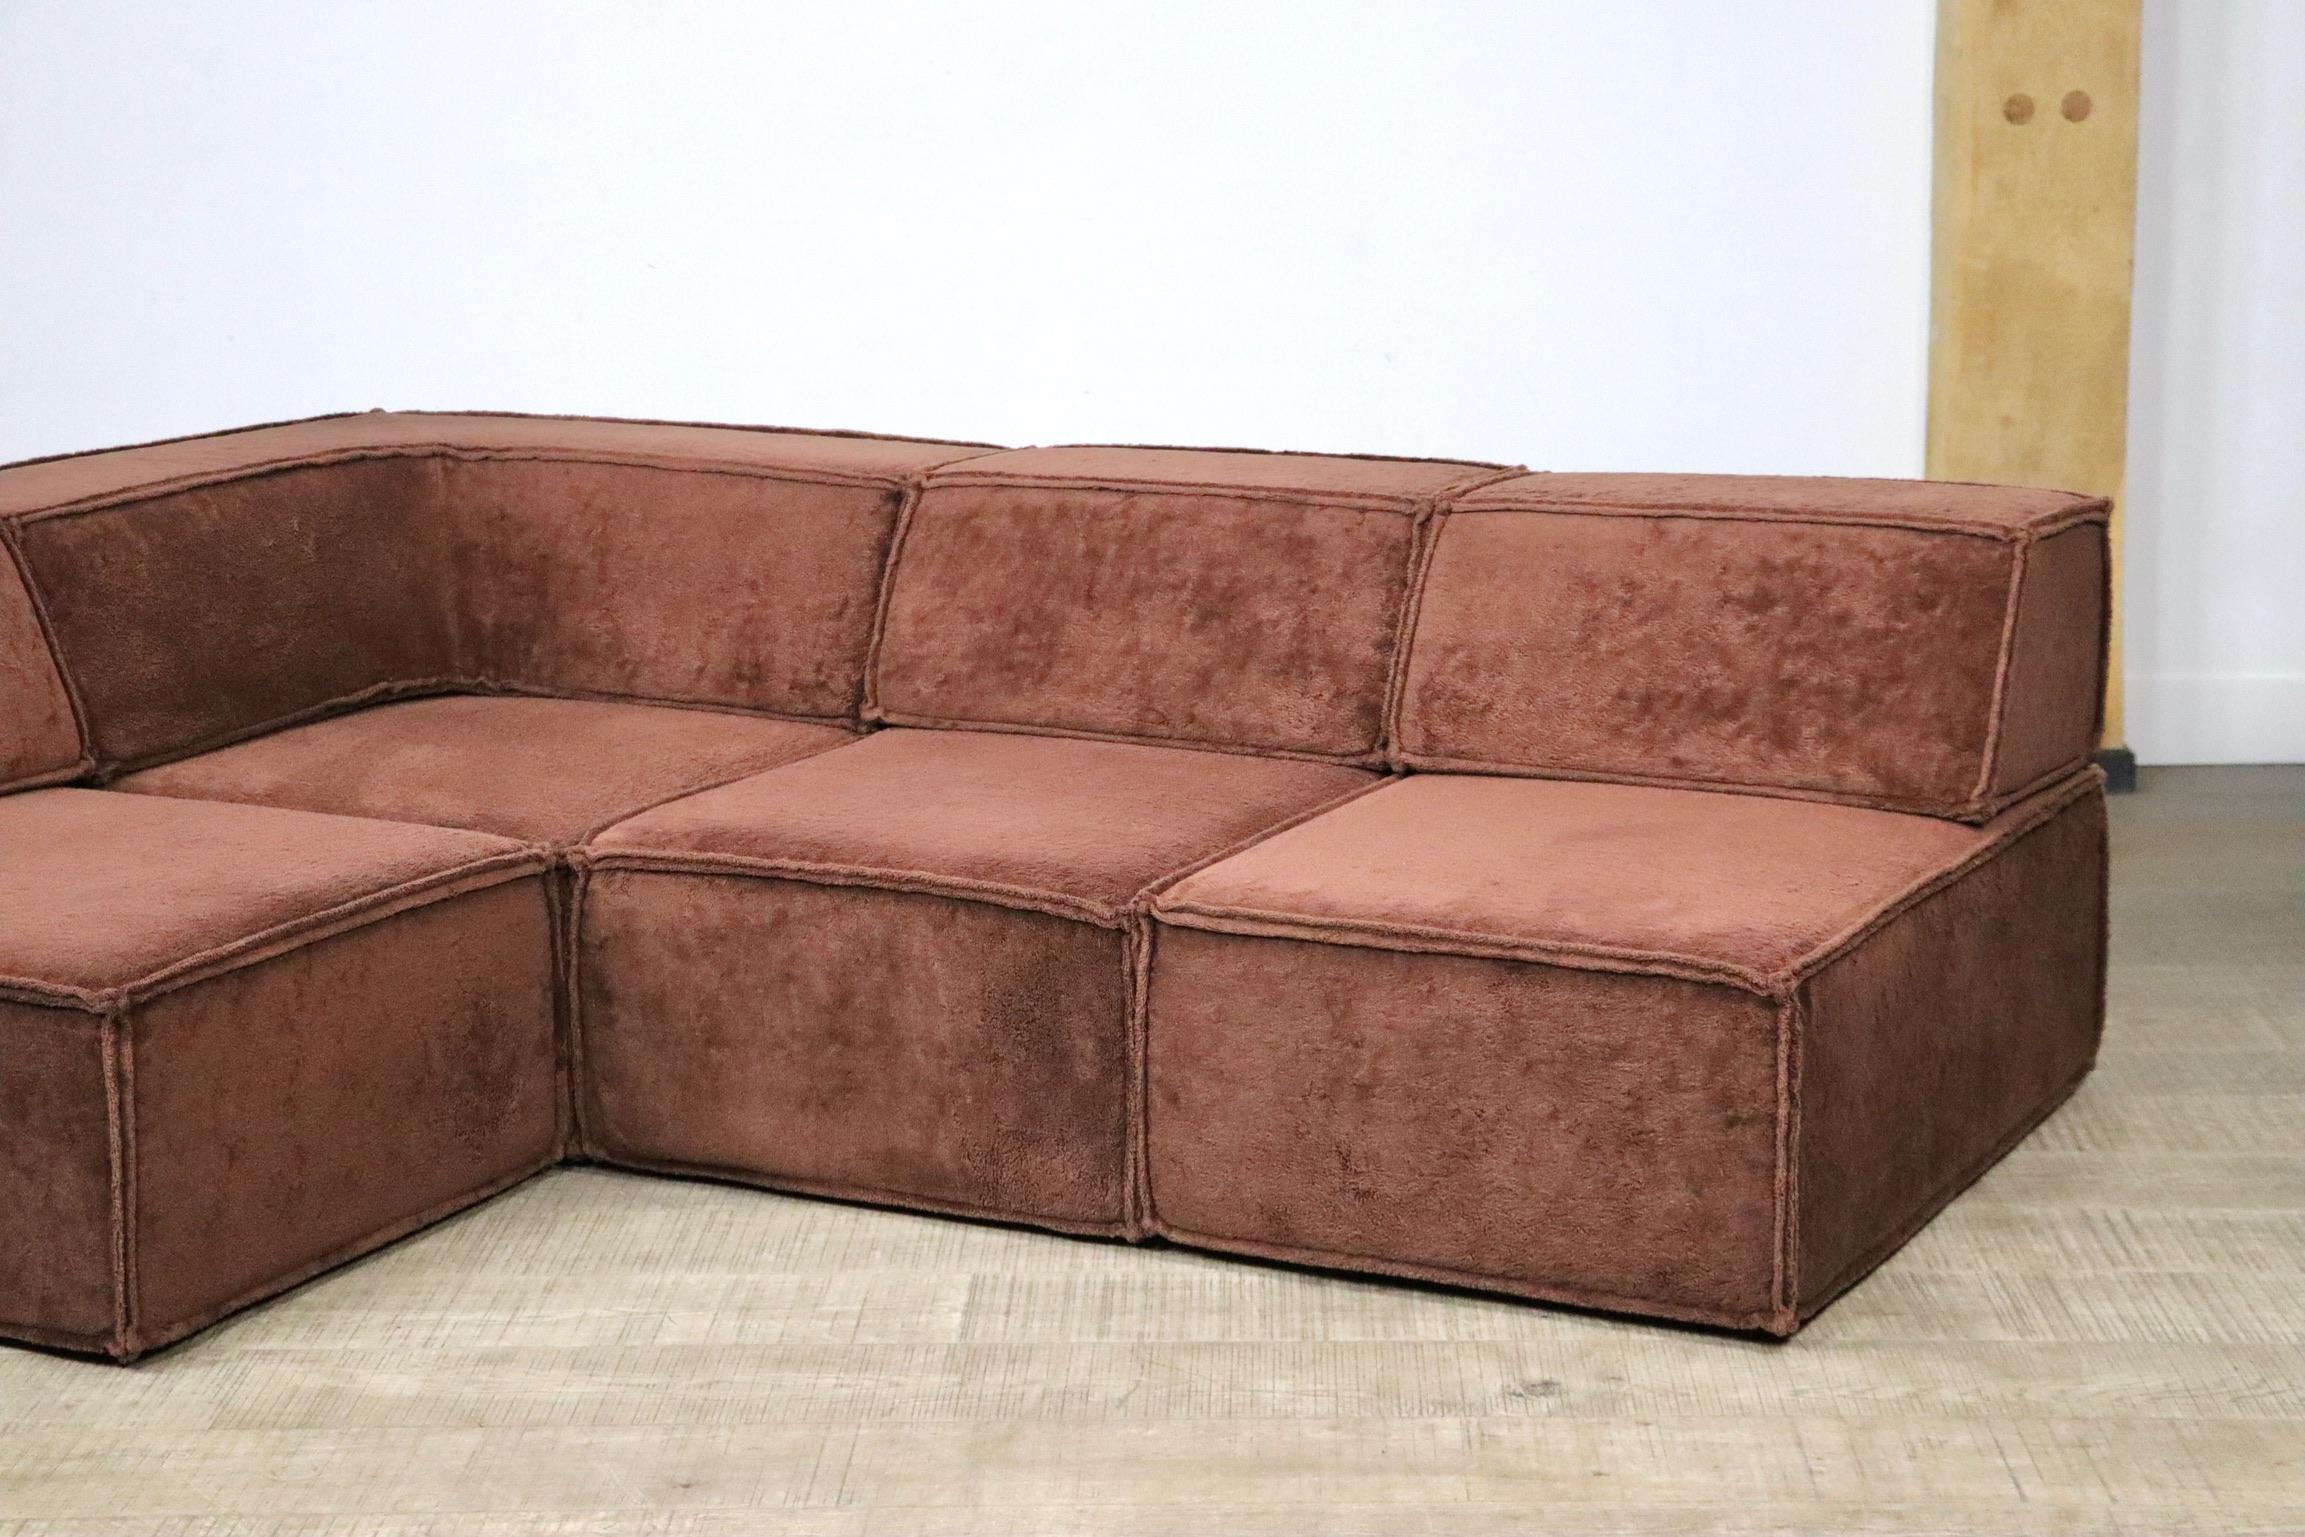 COR Trio modular sofa by Team Form AG, 1970s



Beautiful and iconic modular sofa in brown teddy fabric, which was created in 1972 by Team Form AG in Switzerland for COR, blends seamlessly into any environment. Taking the backrest away it can